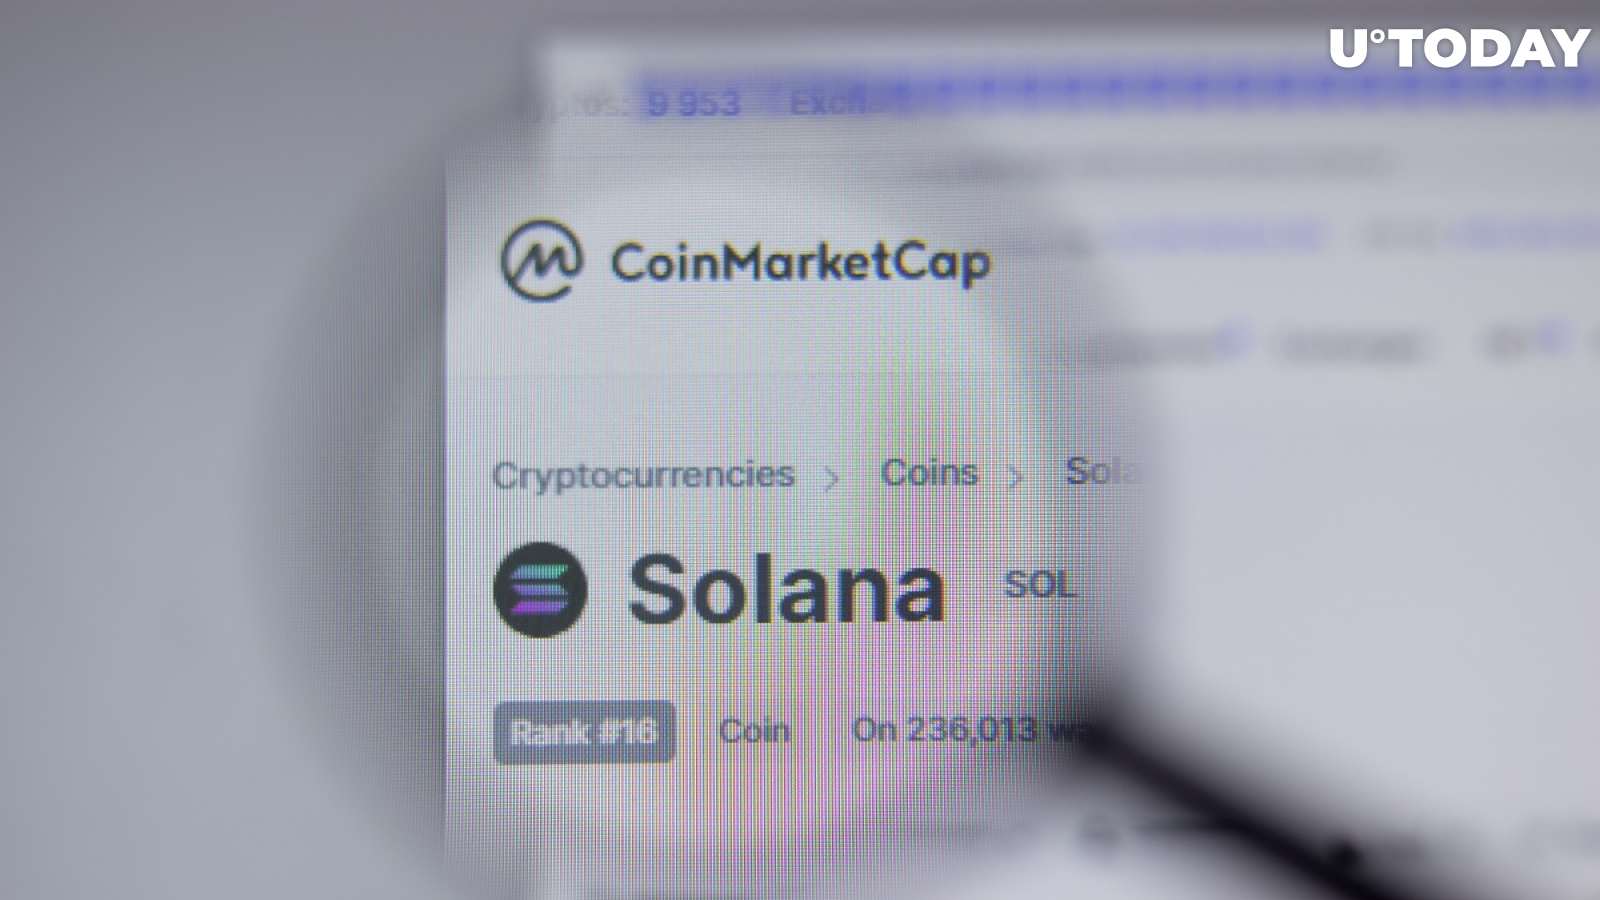 Solana Gets Listed by Gemini as Price Surges 12%